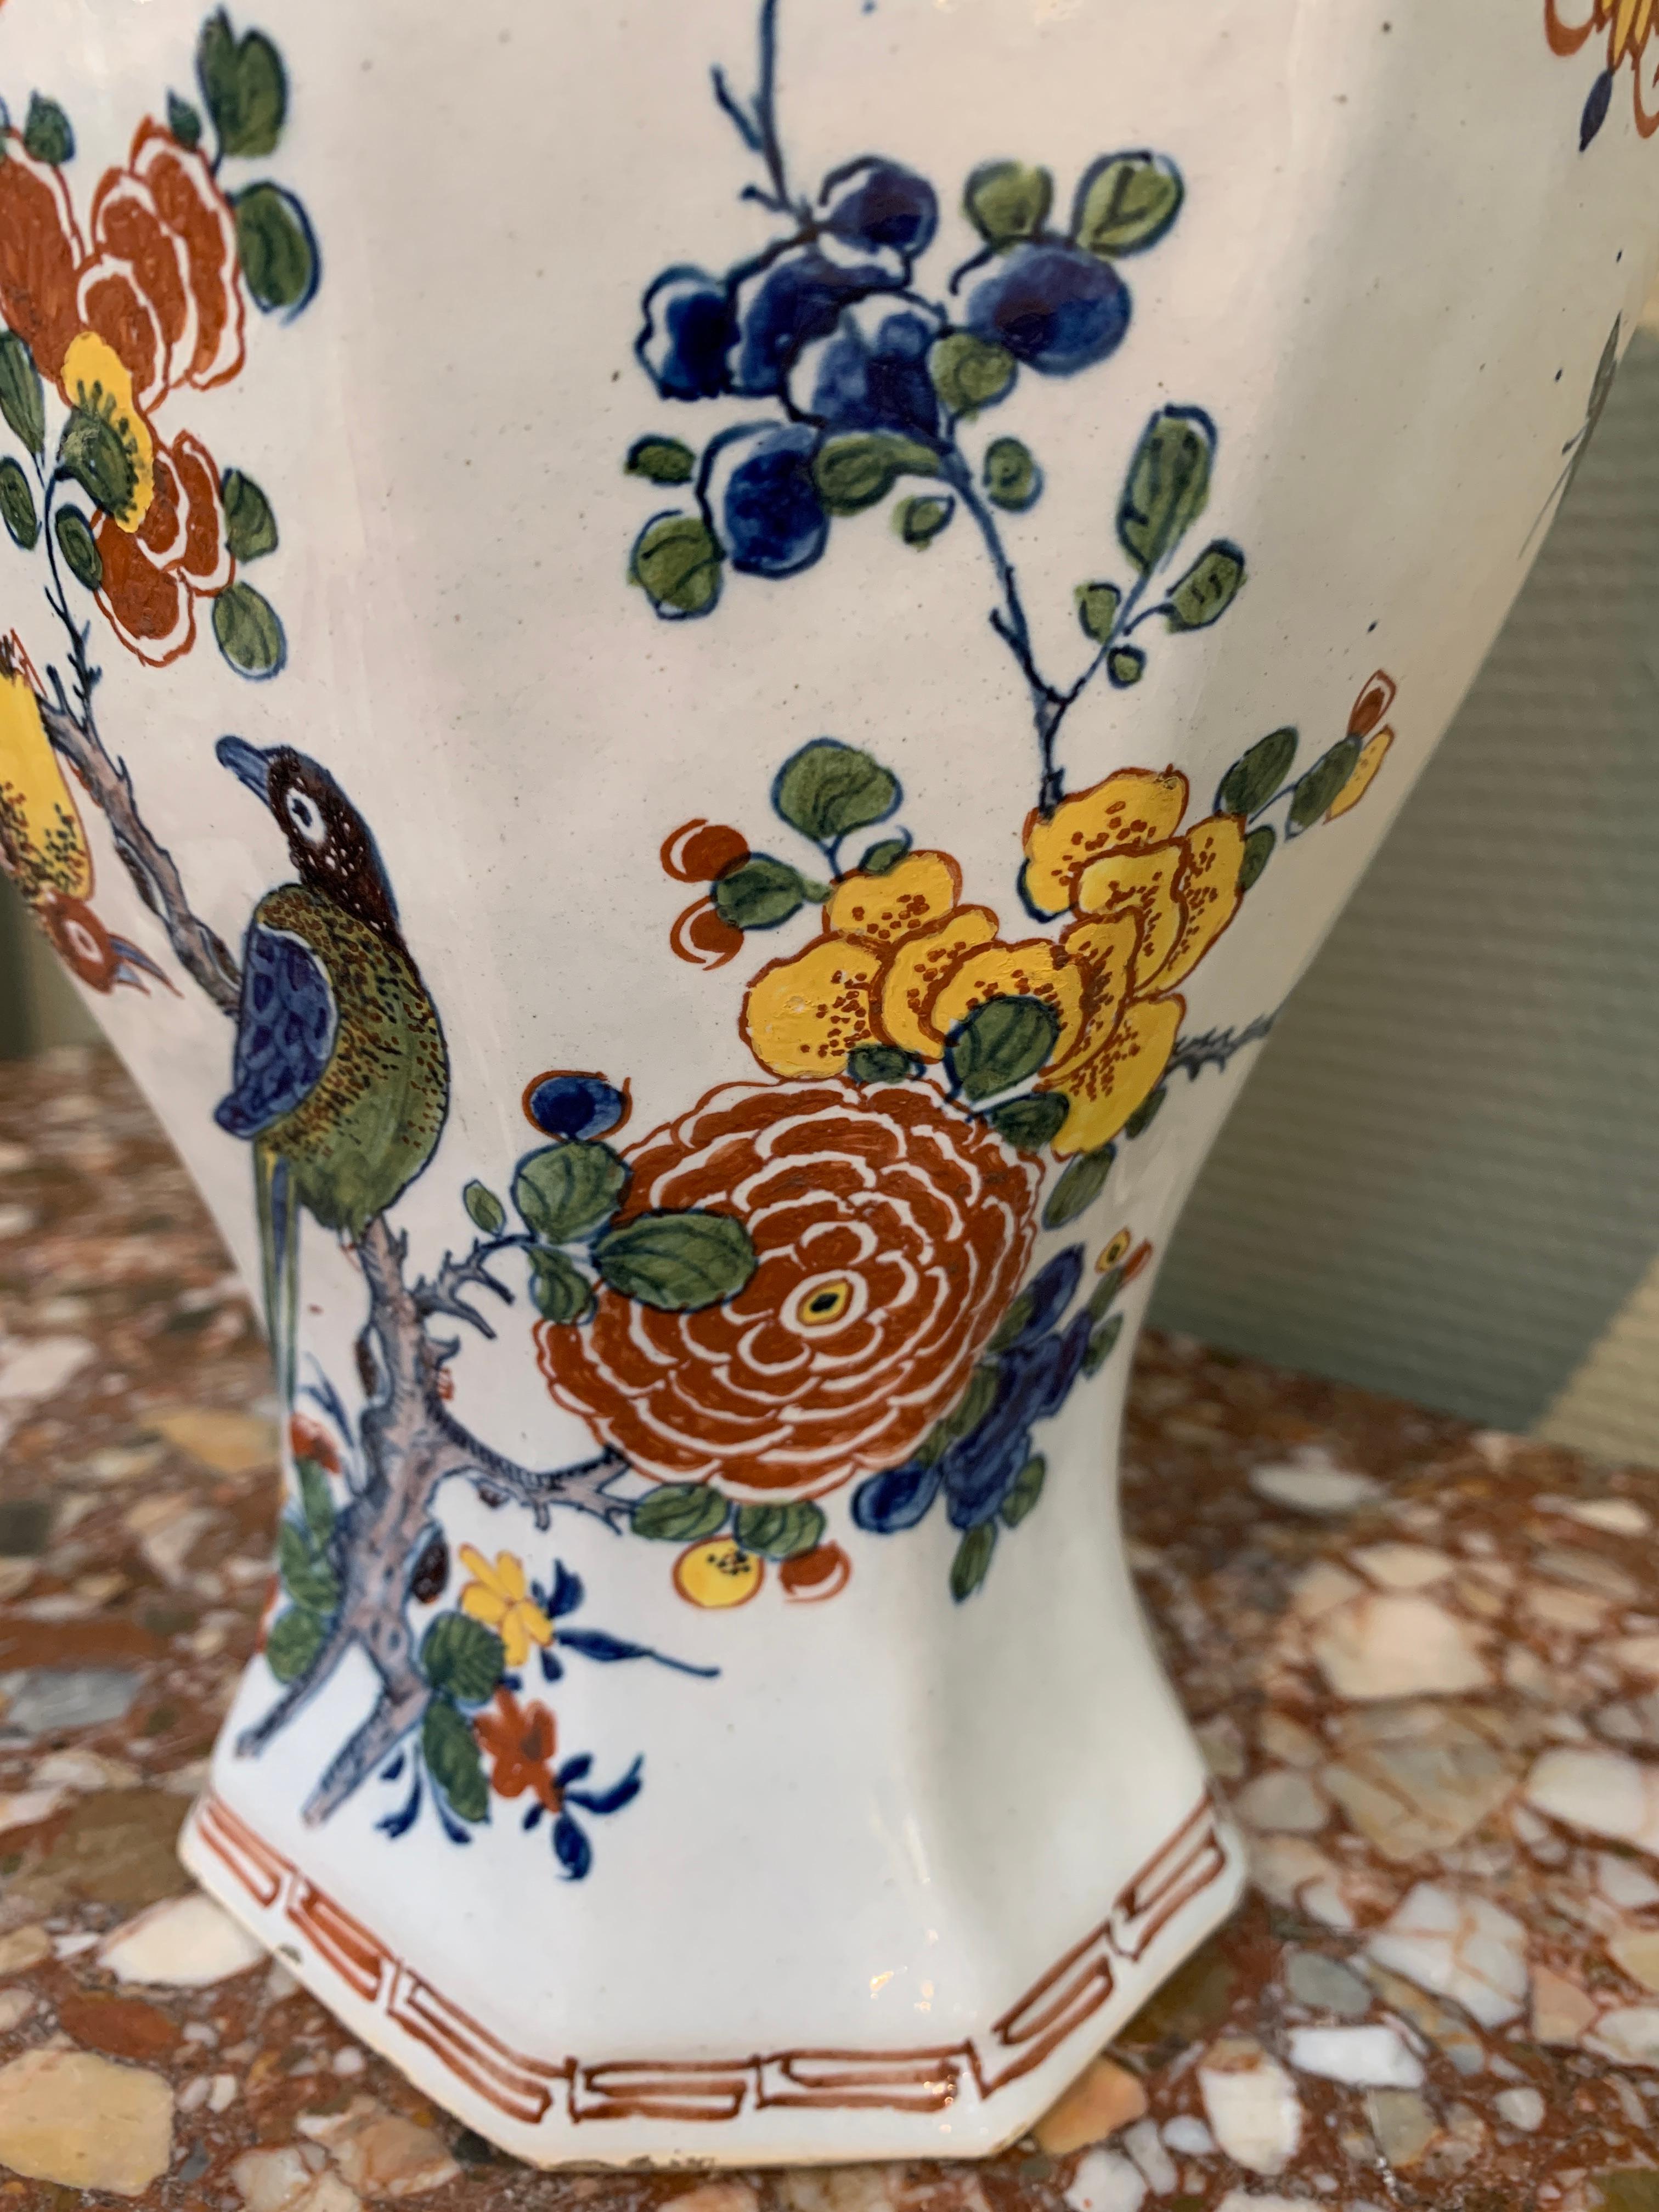 Glazed Dutch Delft Polychrome Vase with Flowers and Birds, Mid 18th Century For Sale